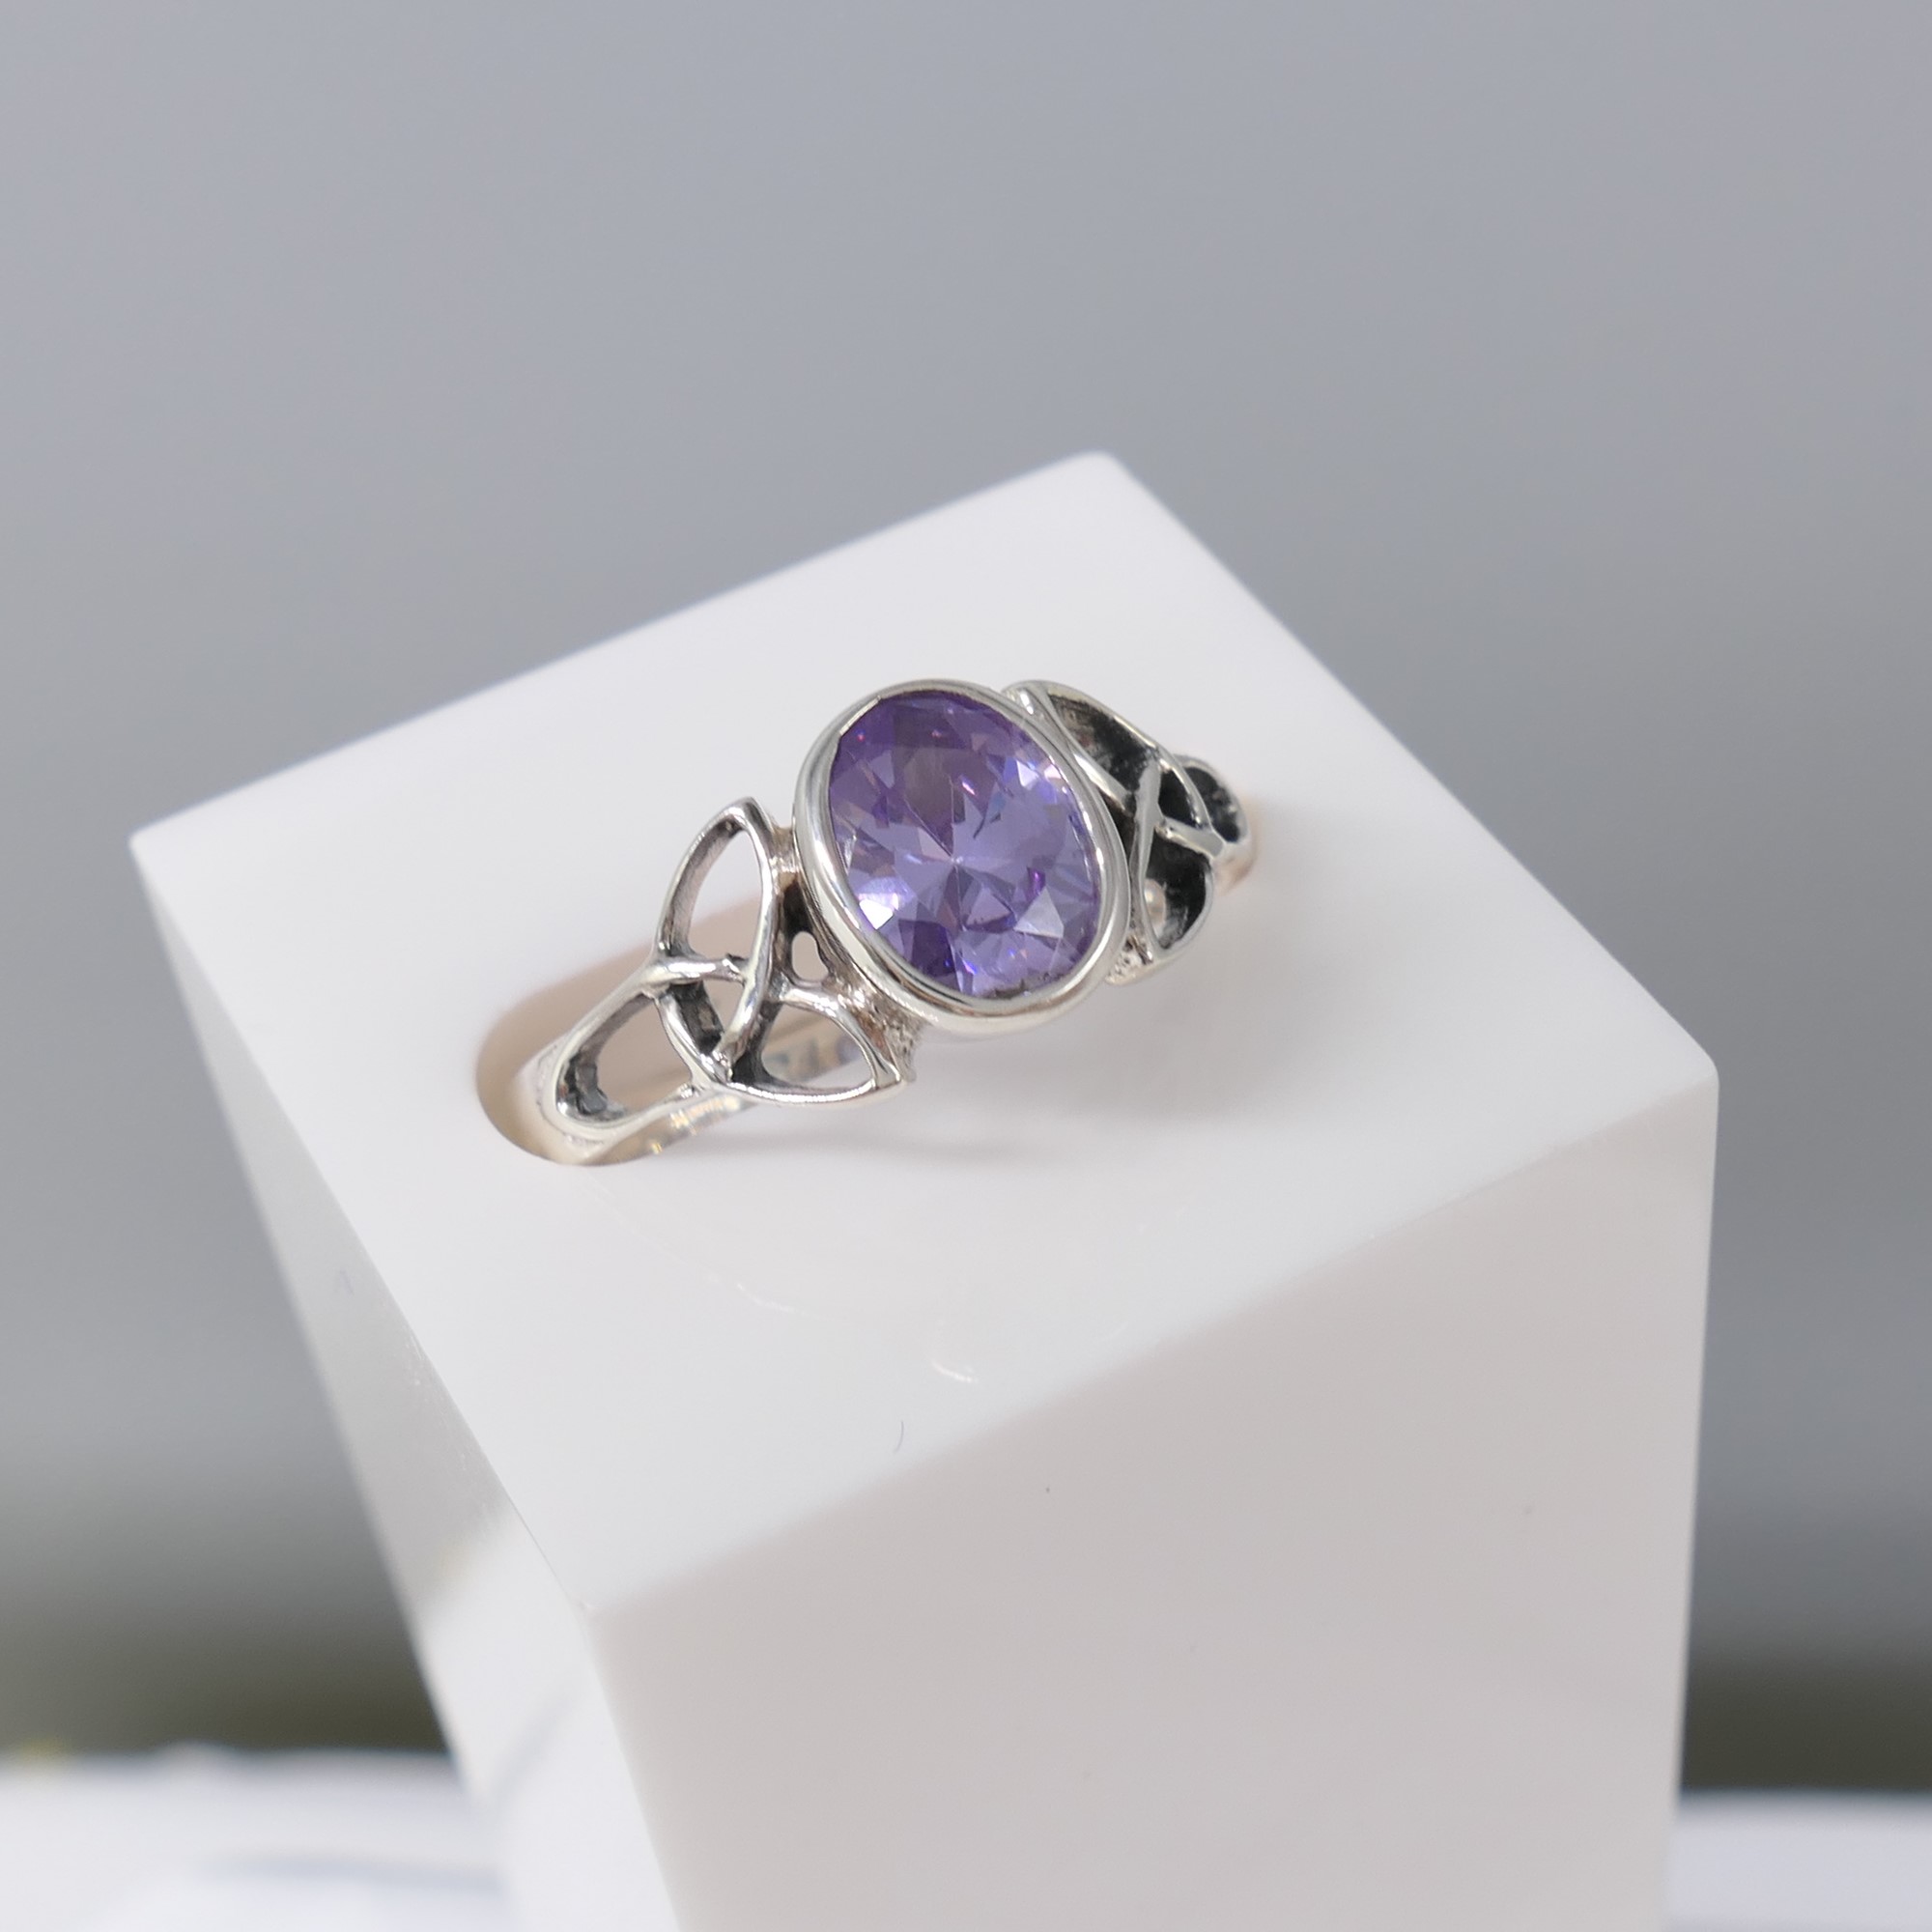 Sterling silver Celtic-style dress ring set with an oval purple cubic zirconia - Image 2 of 6